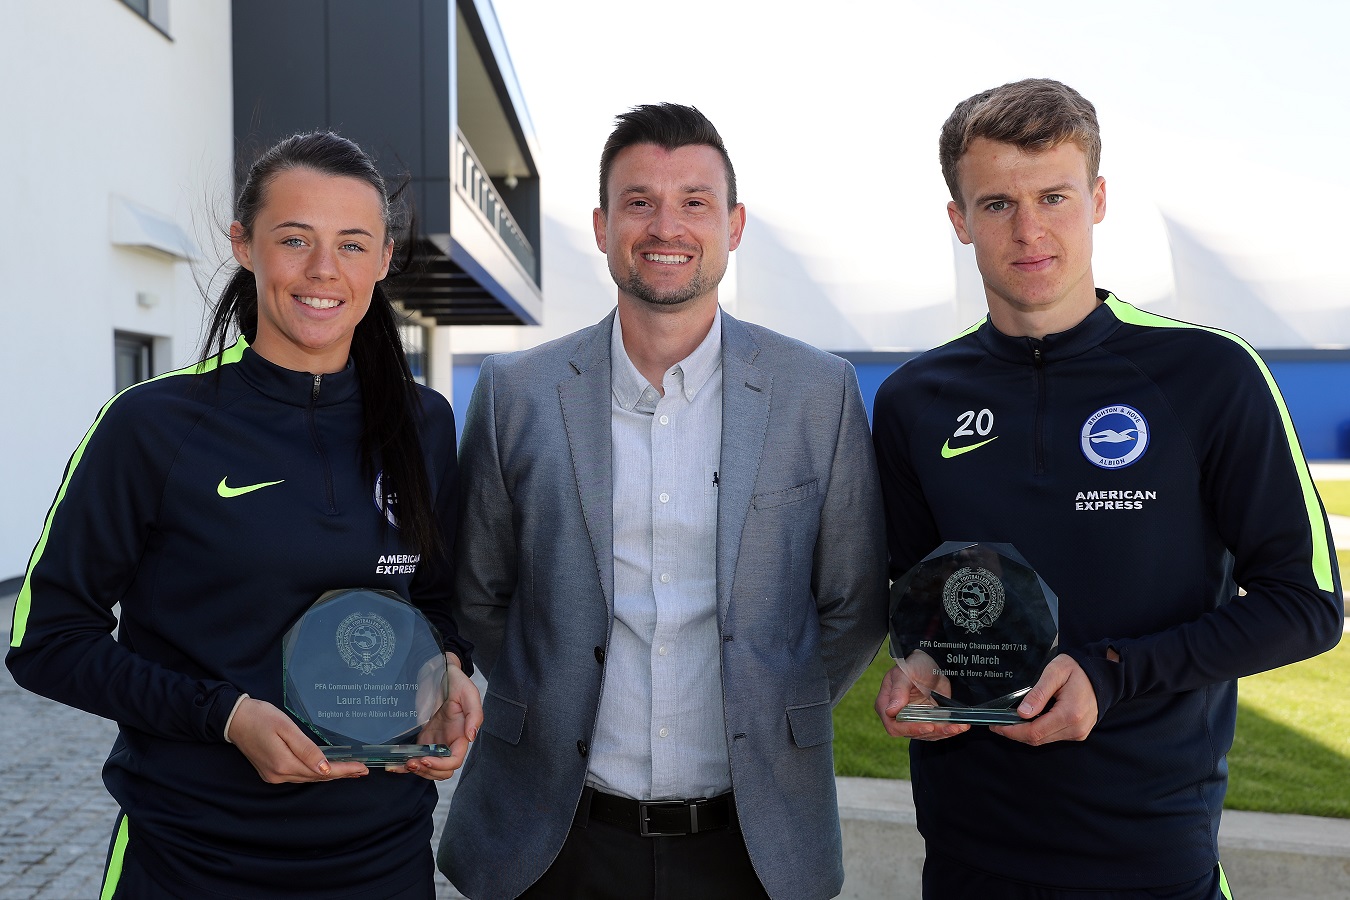 PFA Community Champion awards highlight fantastic support from players